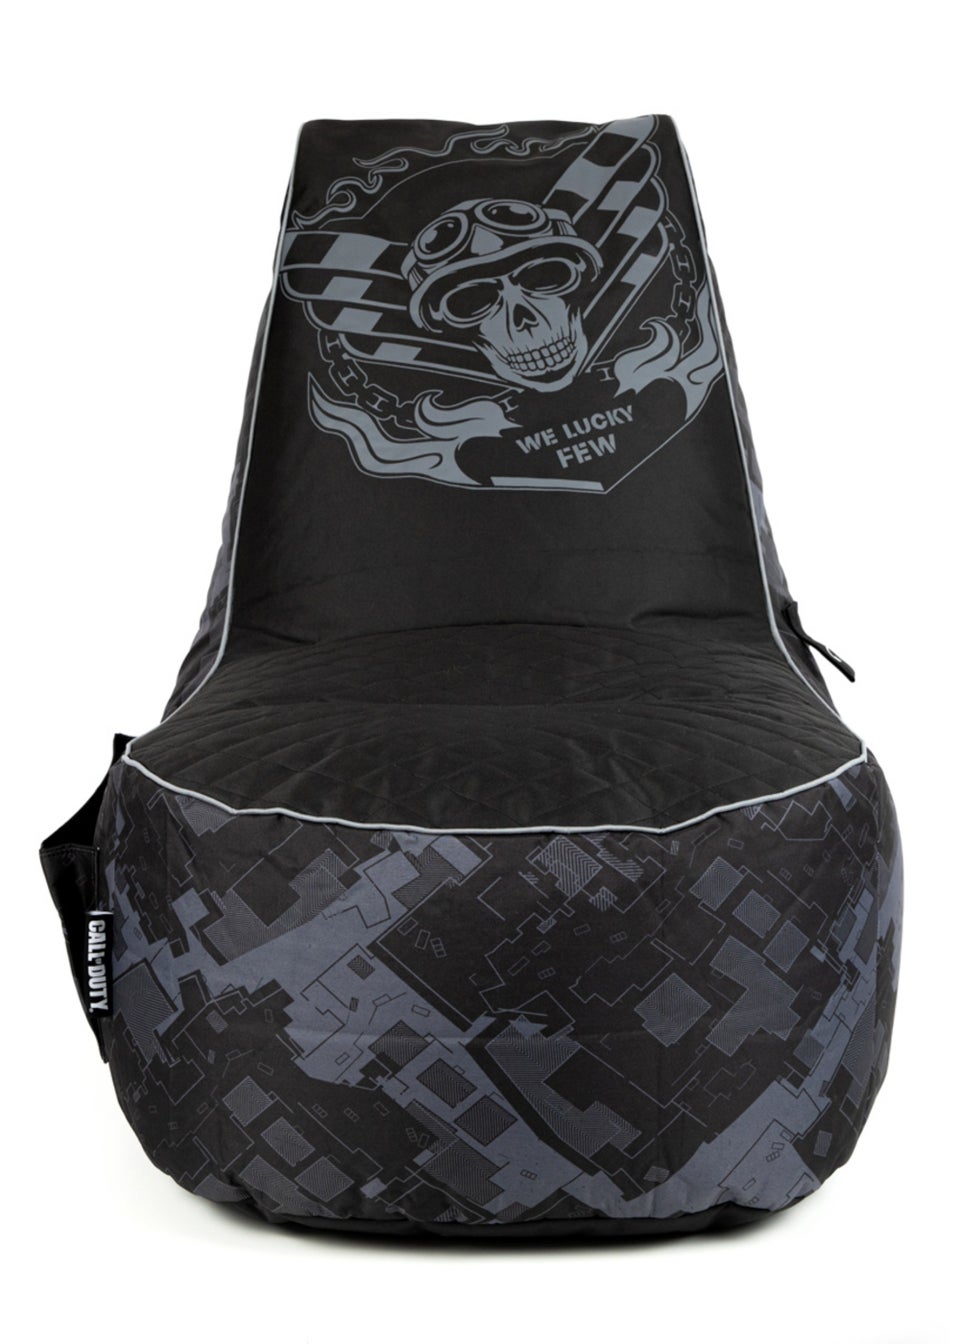 KAIKOO Call of Duty Gaming Chair